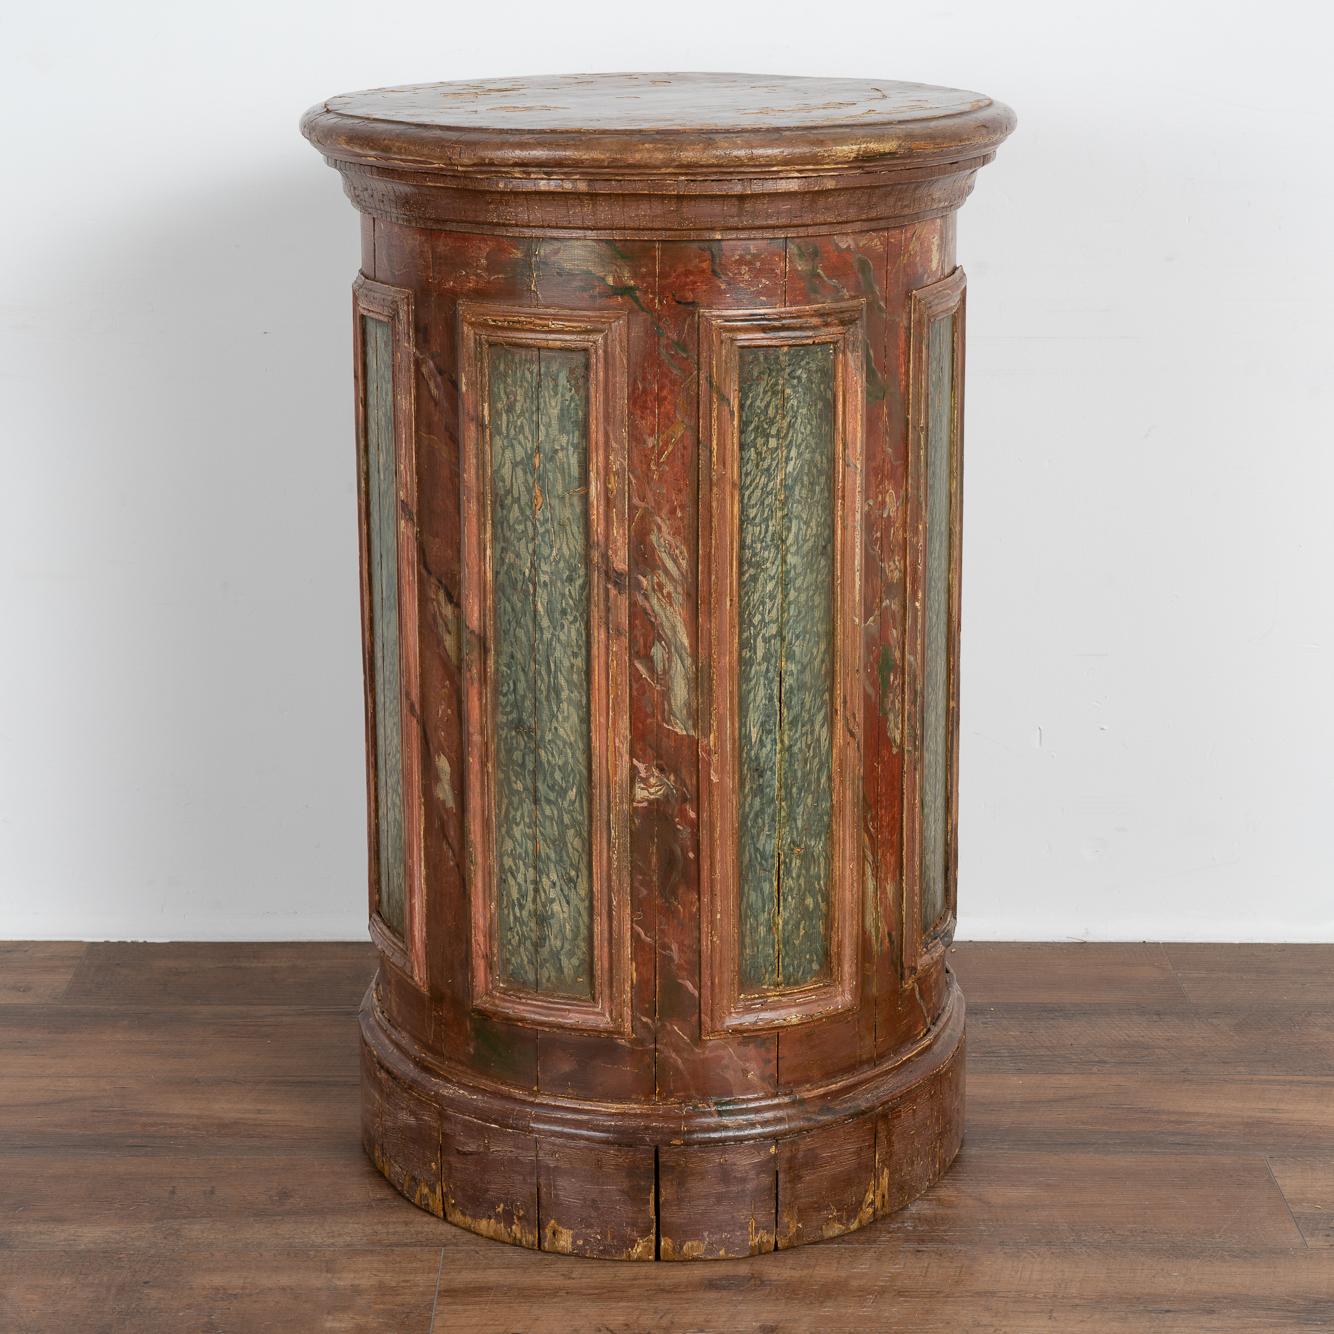 Antique Red Painted Wood Display Pedestal from Sweden, circa 1840-1860 For Sale 6